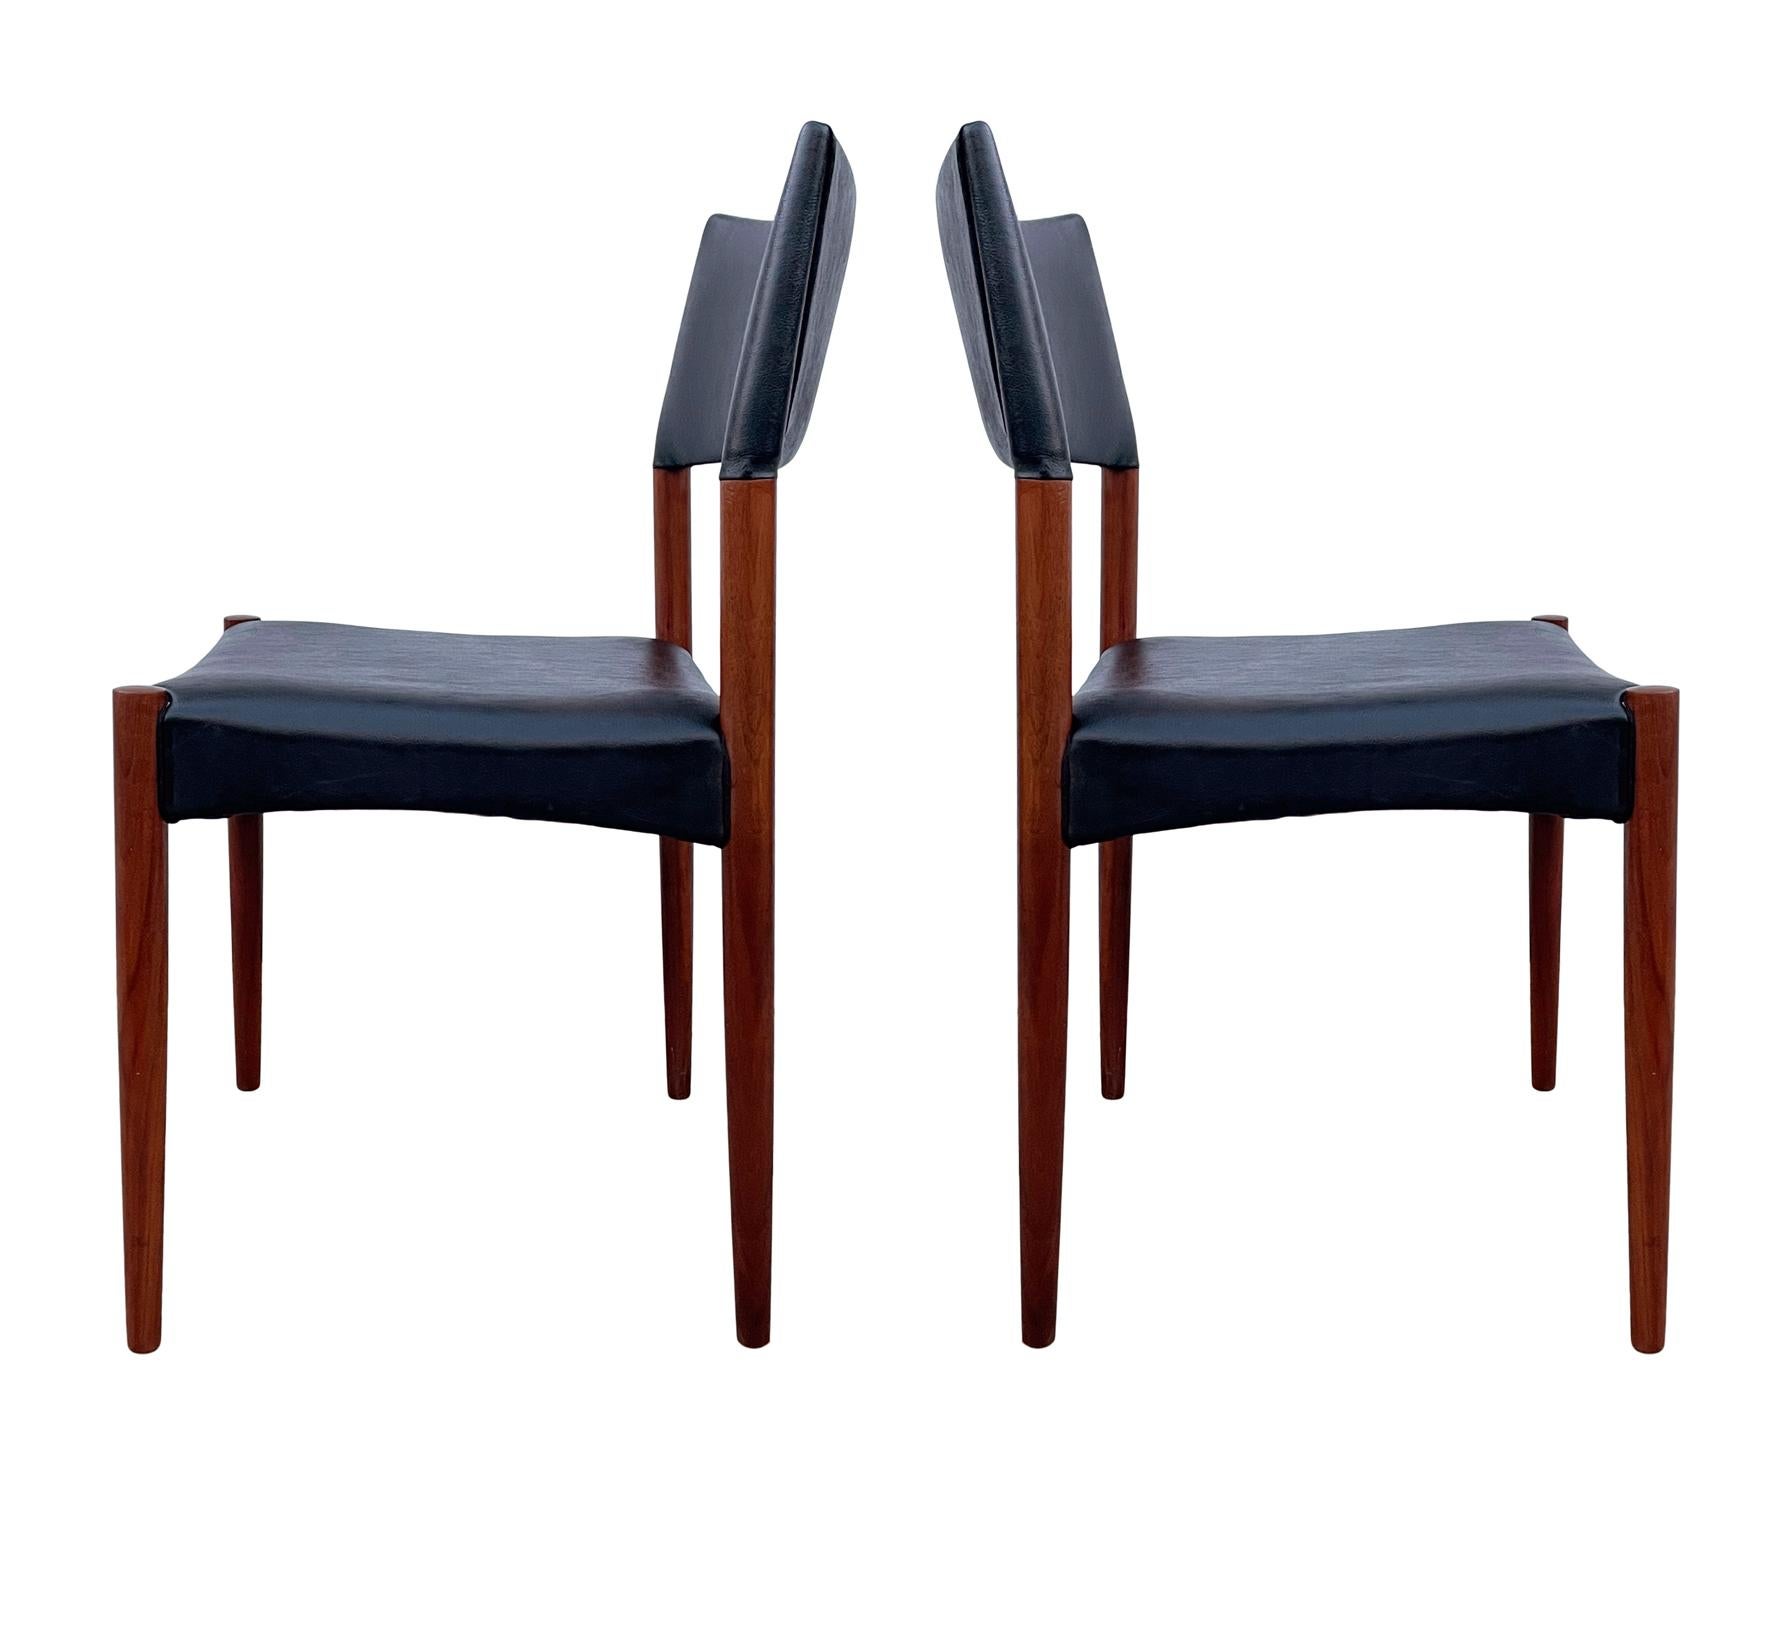 Set of 4 Mid Century Danish Modern Dining Chairs in Teak by Villy Schou Andersen For Sale 2